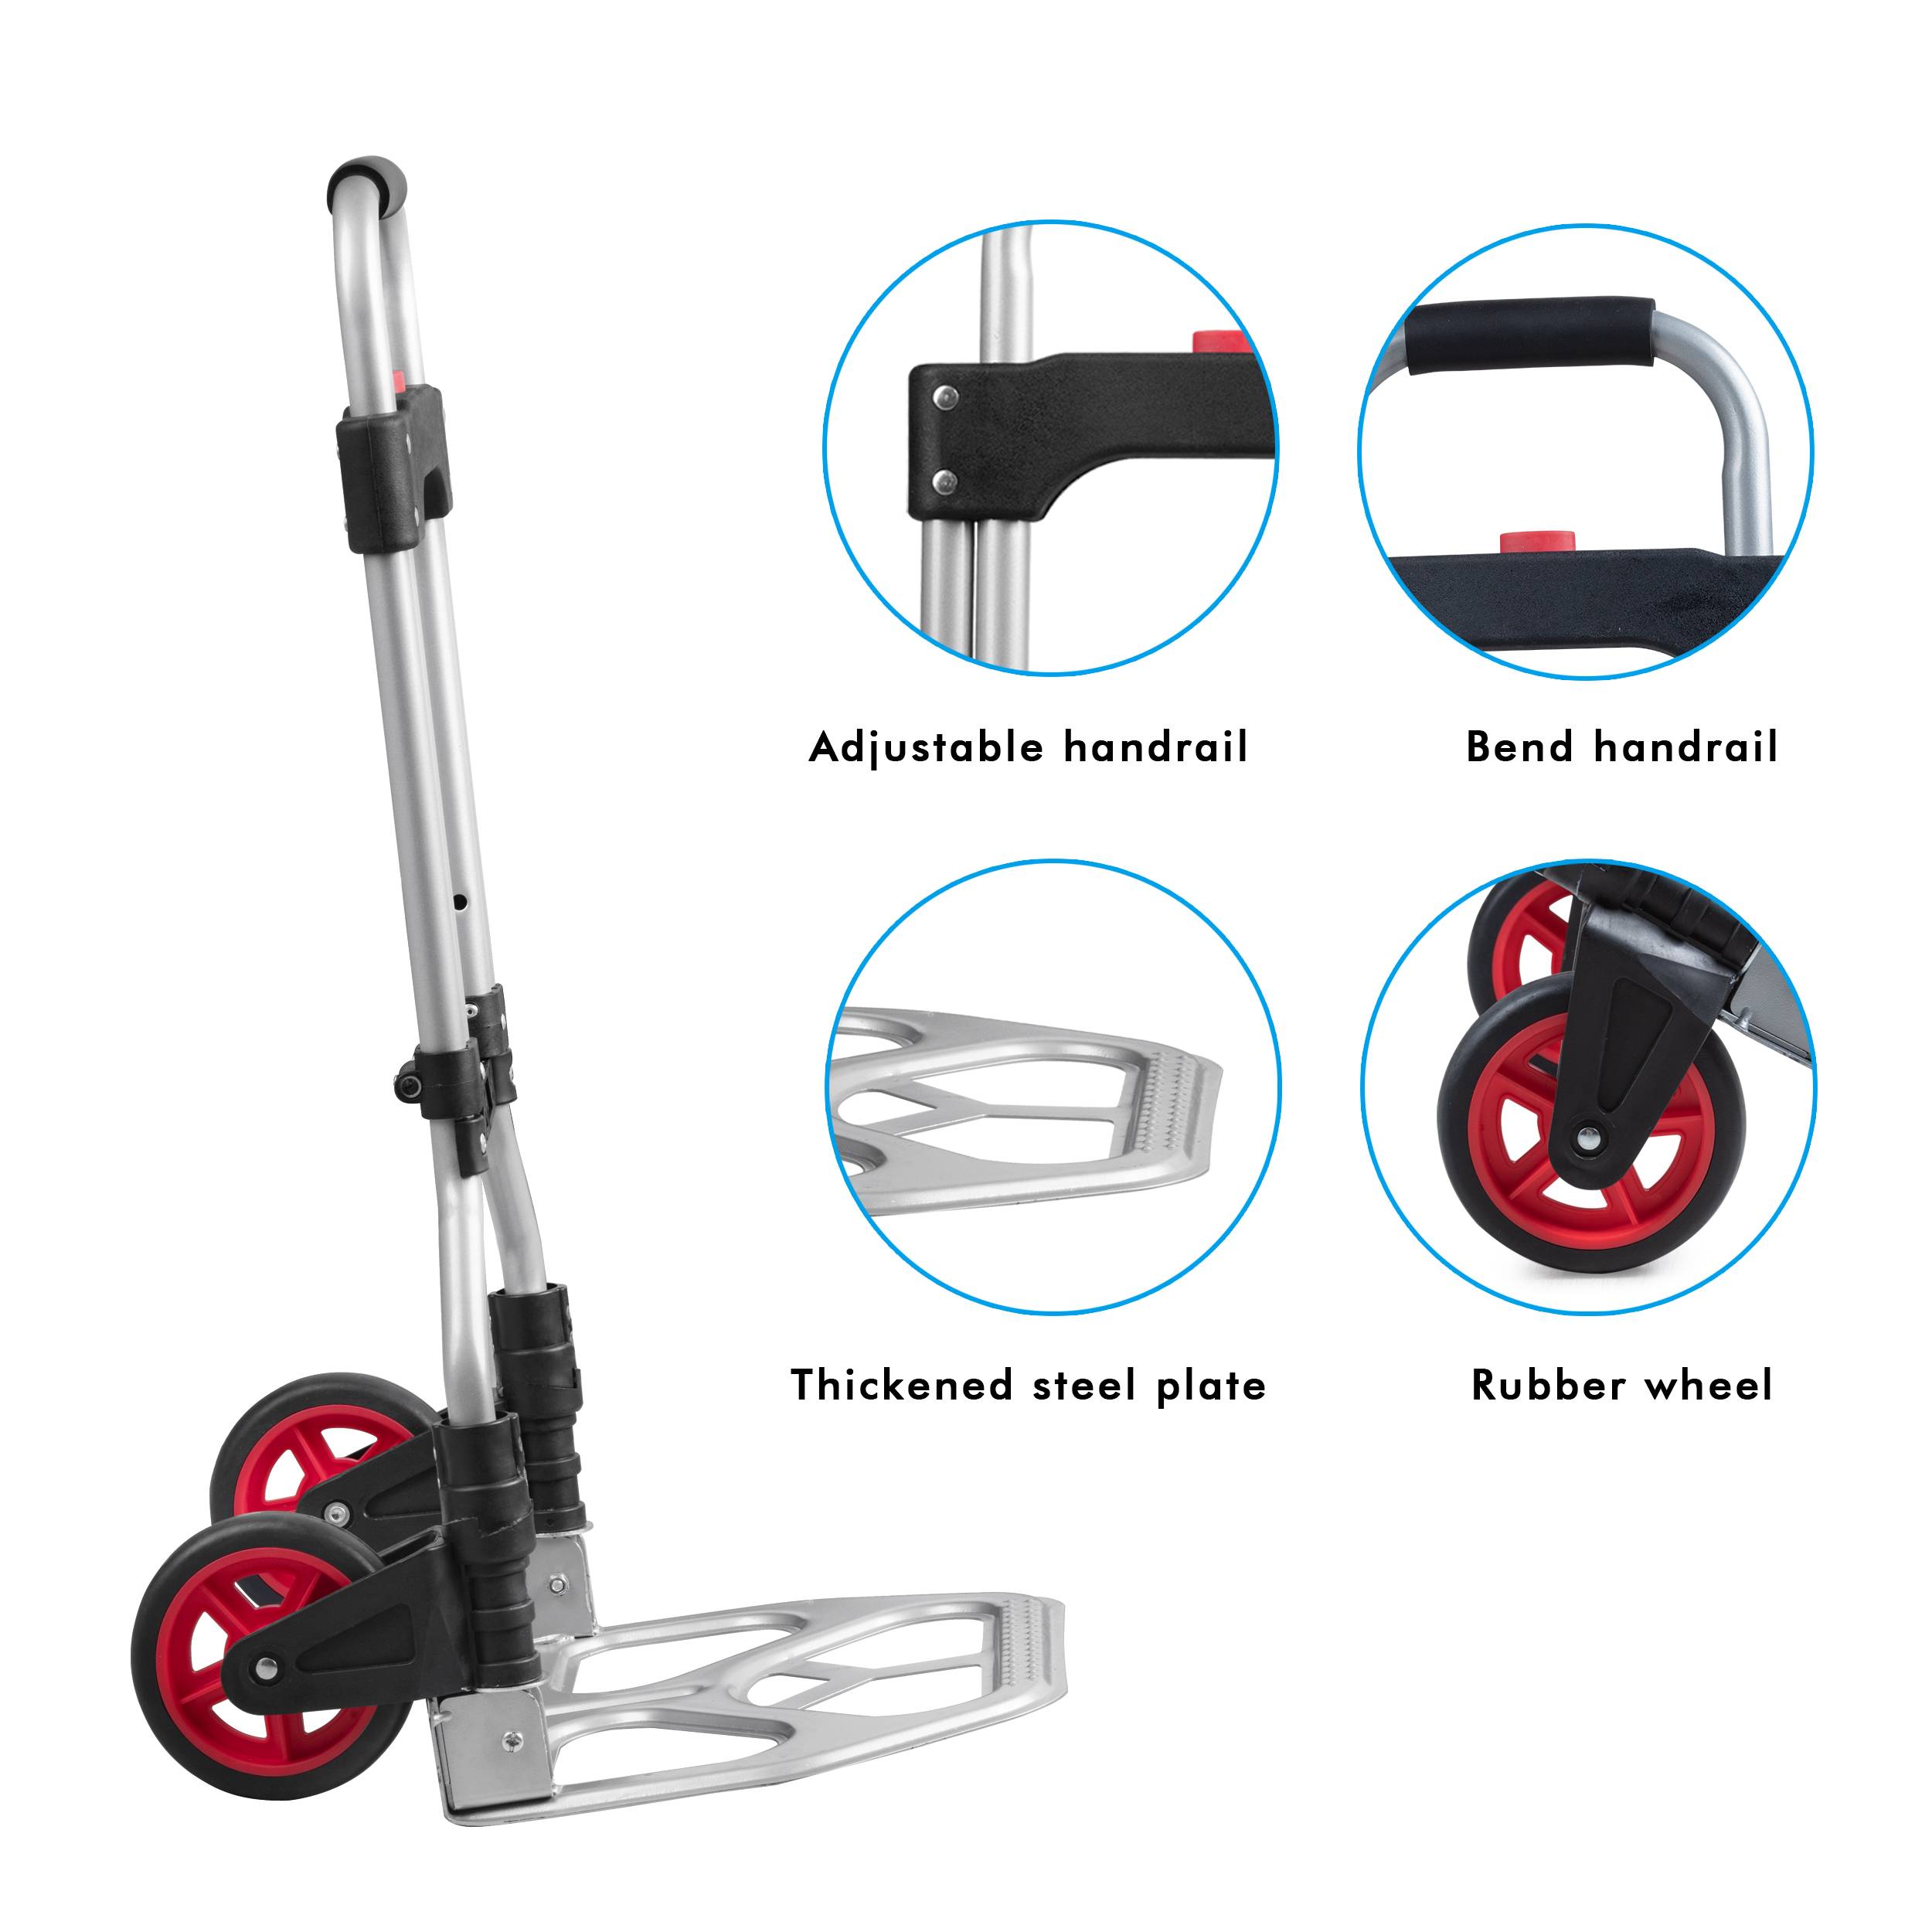 LEADALLWAY Platform Truck Large Size Hand Truck Foldable Dolly Cart for  Moving Easy Storage and 360 Degree Swivel Wheels 880lbs Weight Capacity